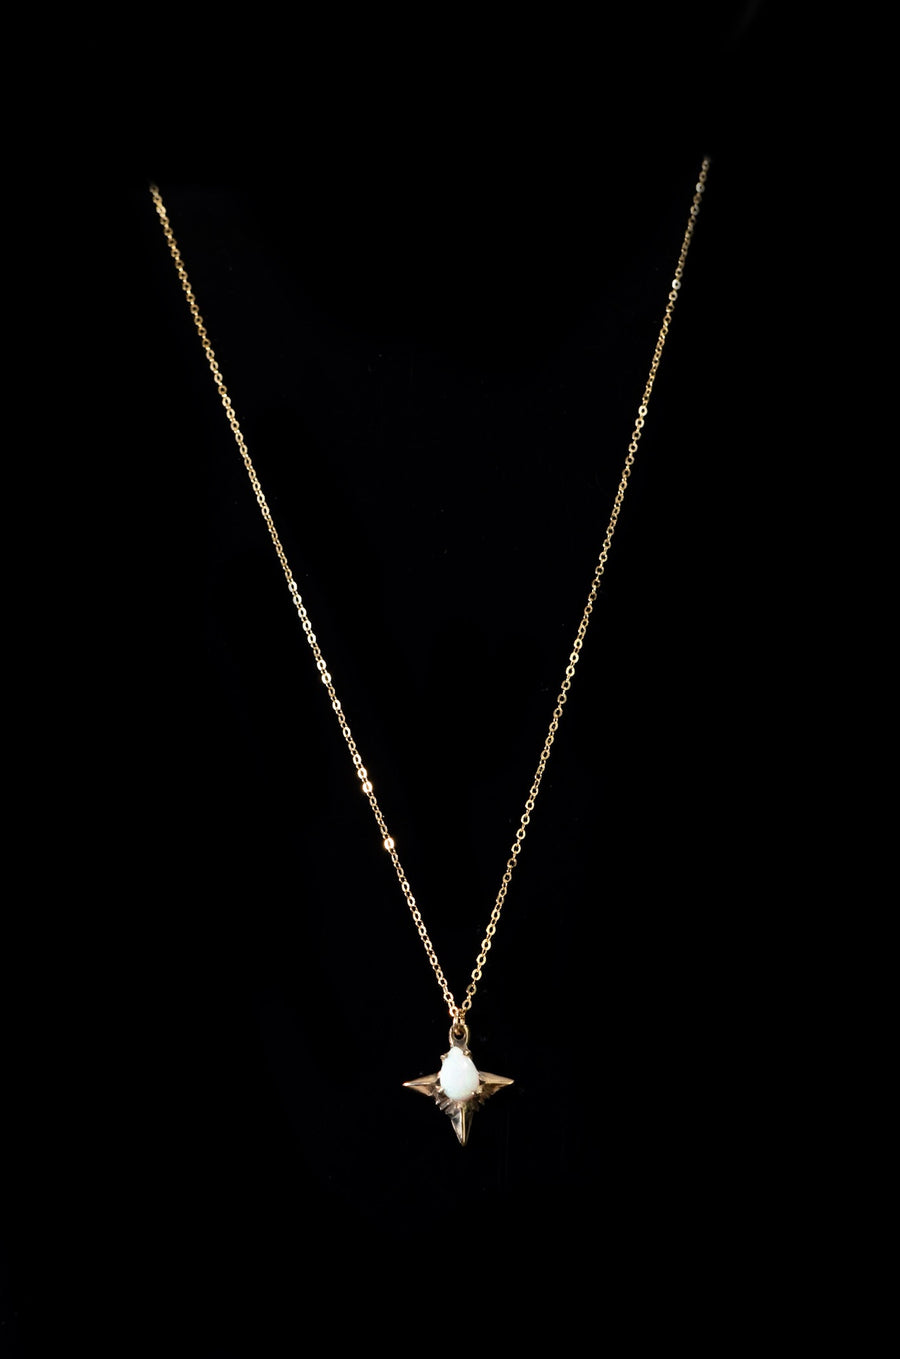 Bronze Morning Star Necklace by Iron Oxide